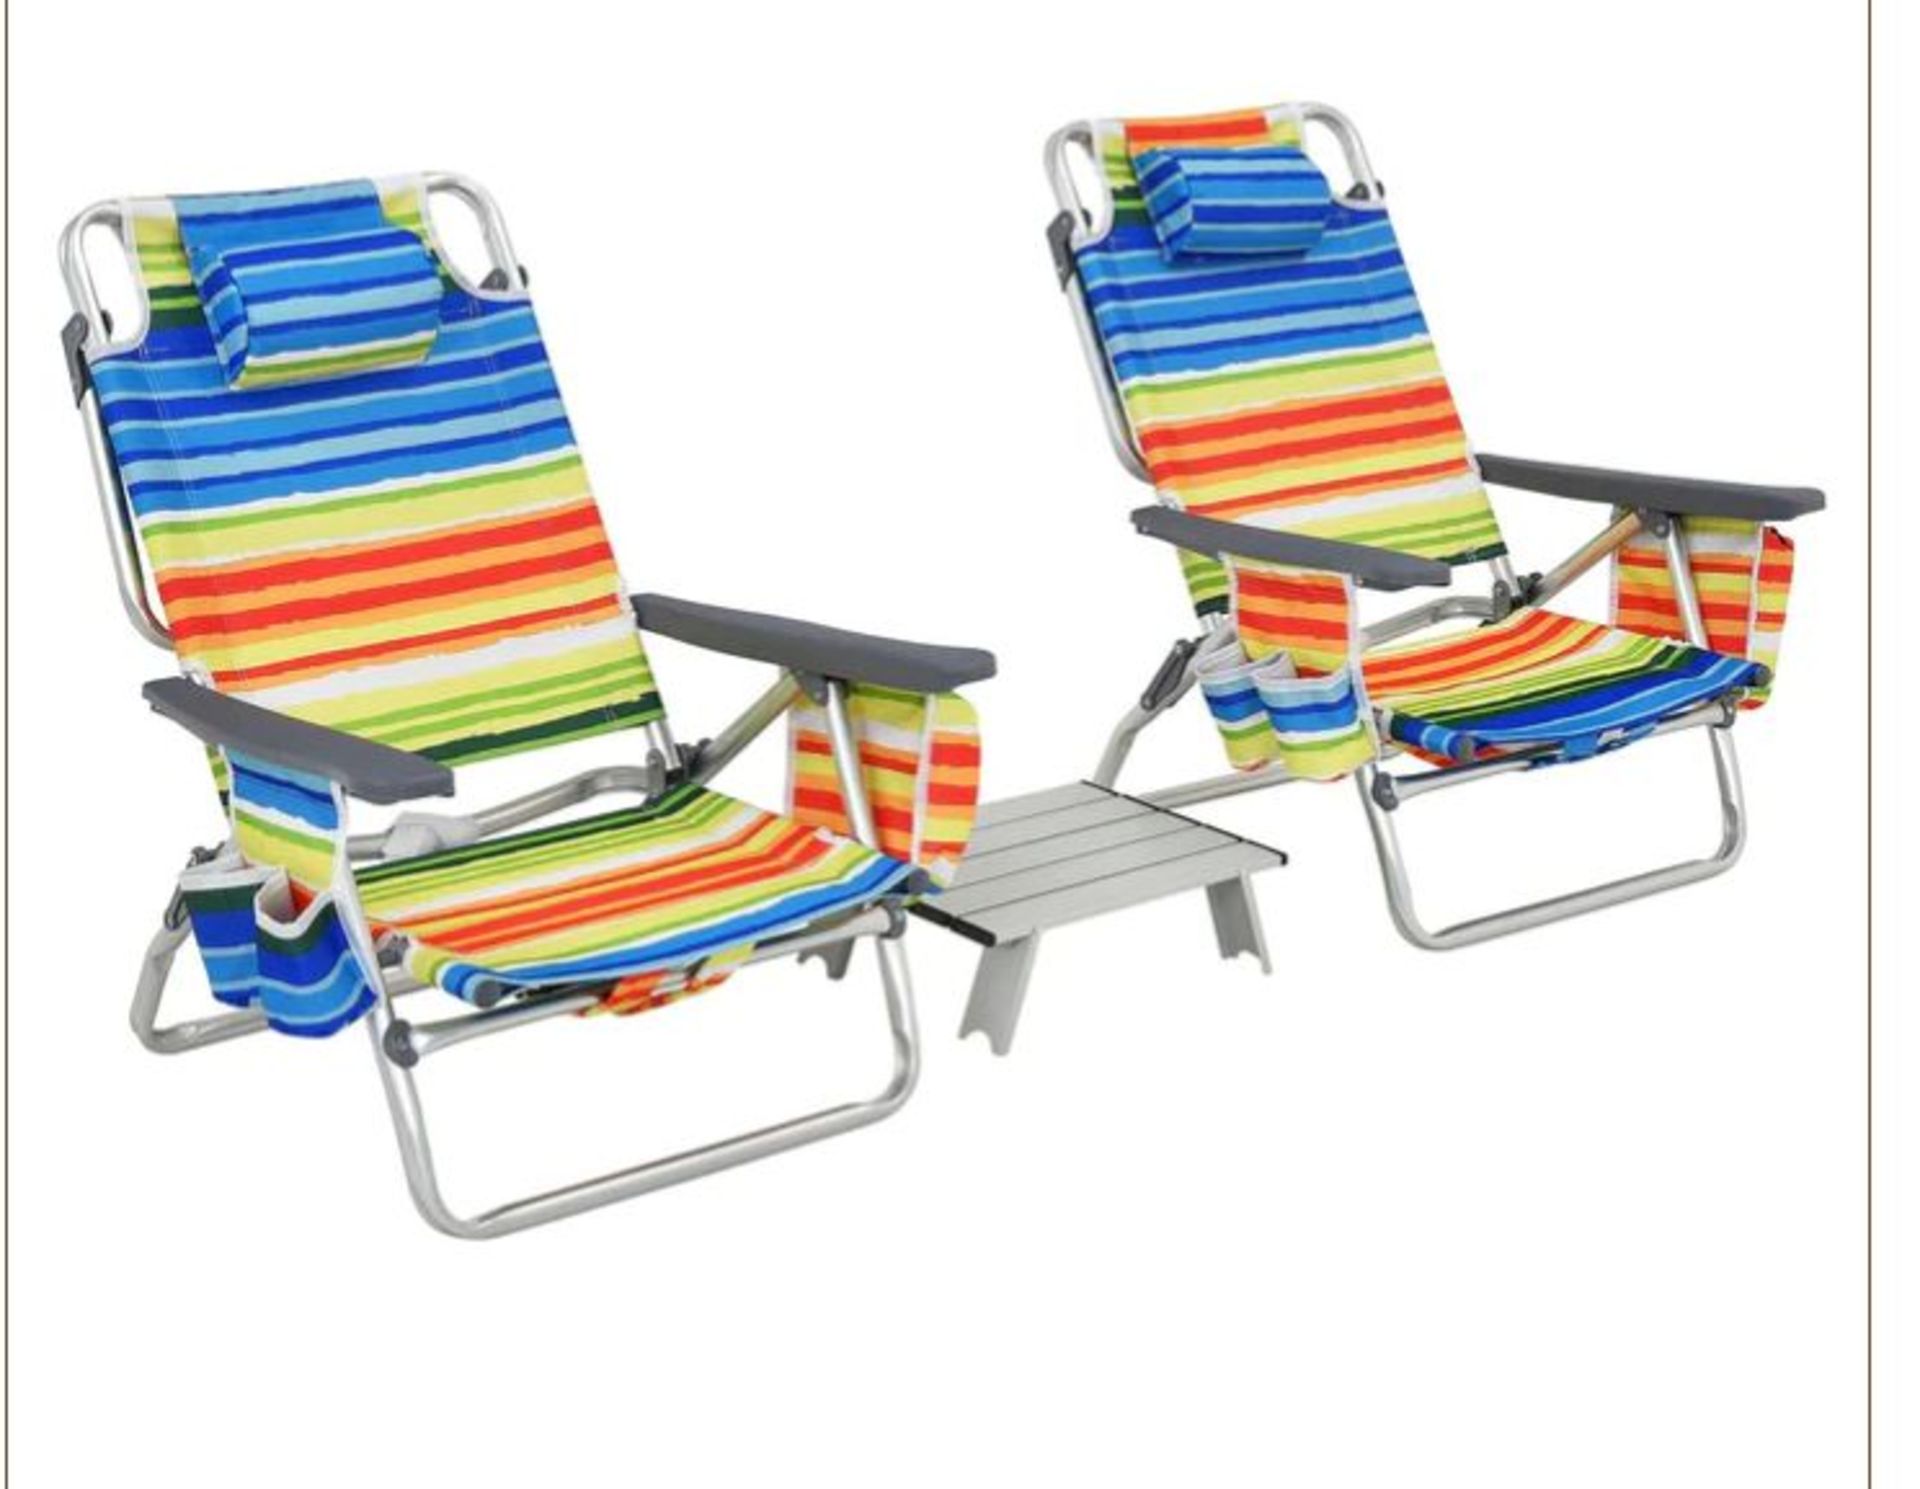 2 PACKS 5-POSITION OUTDOOR FOLDING BACKPACK BEACH TABLE AND RECLINING CHAIR SET-YELLOW. - R14.8. 2